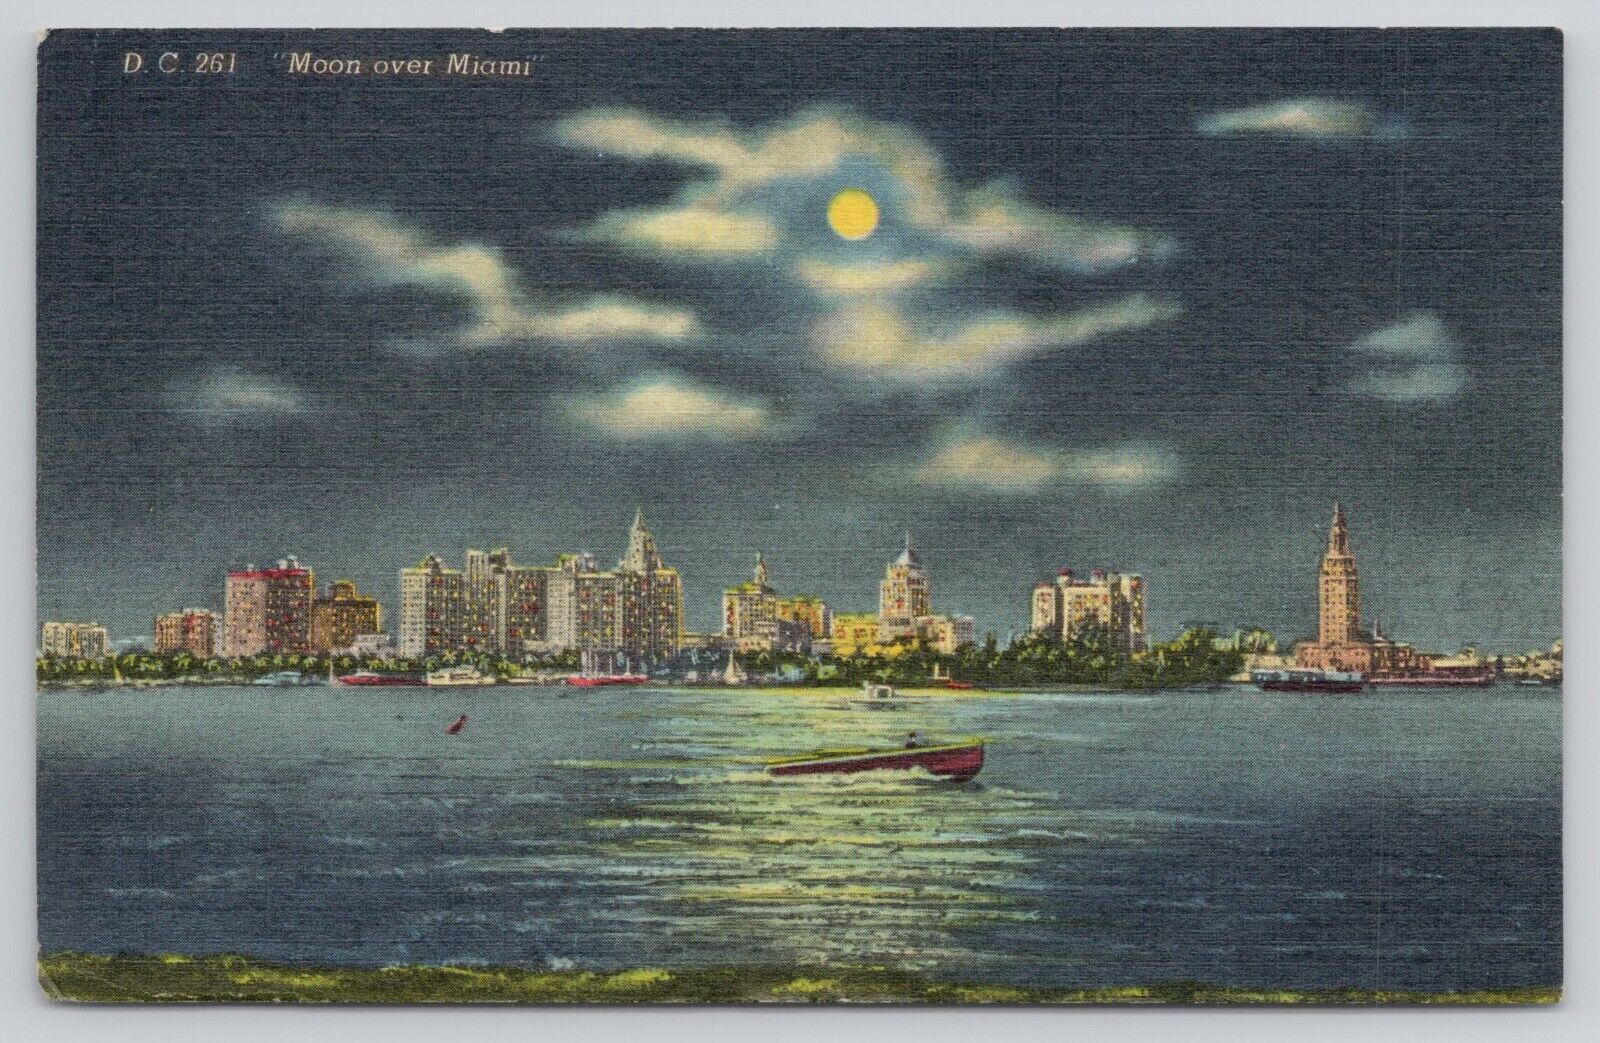 Miami Florida FL - Moon on Cloudy Night View from Ocean 1955 Linen Postcard